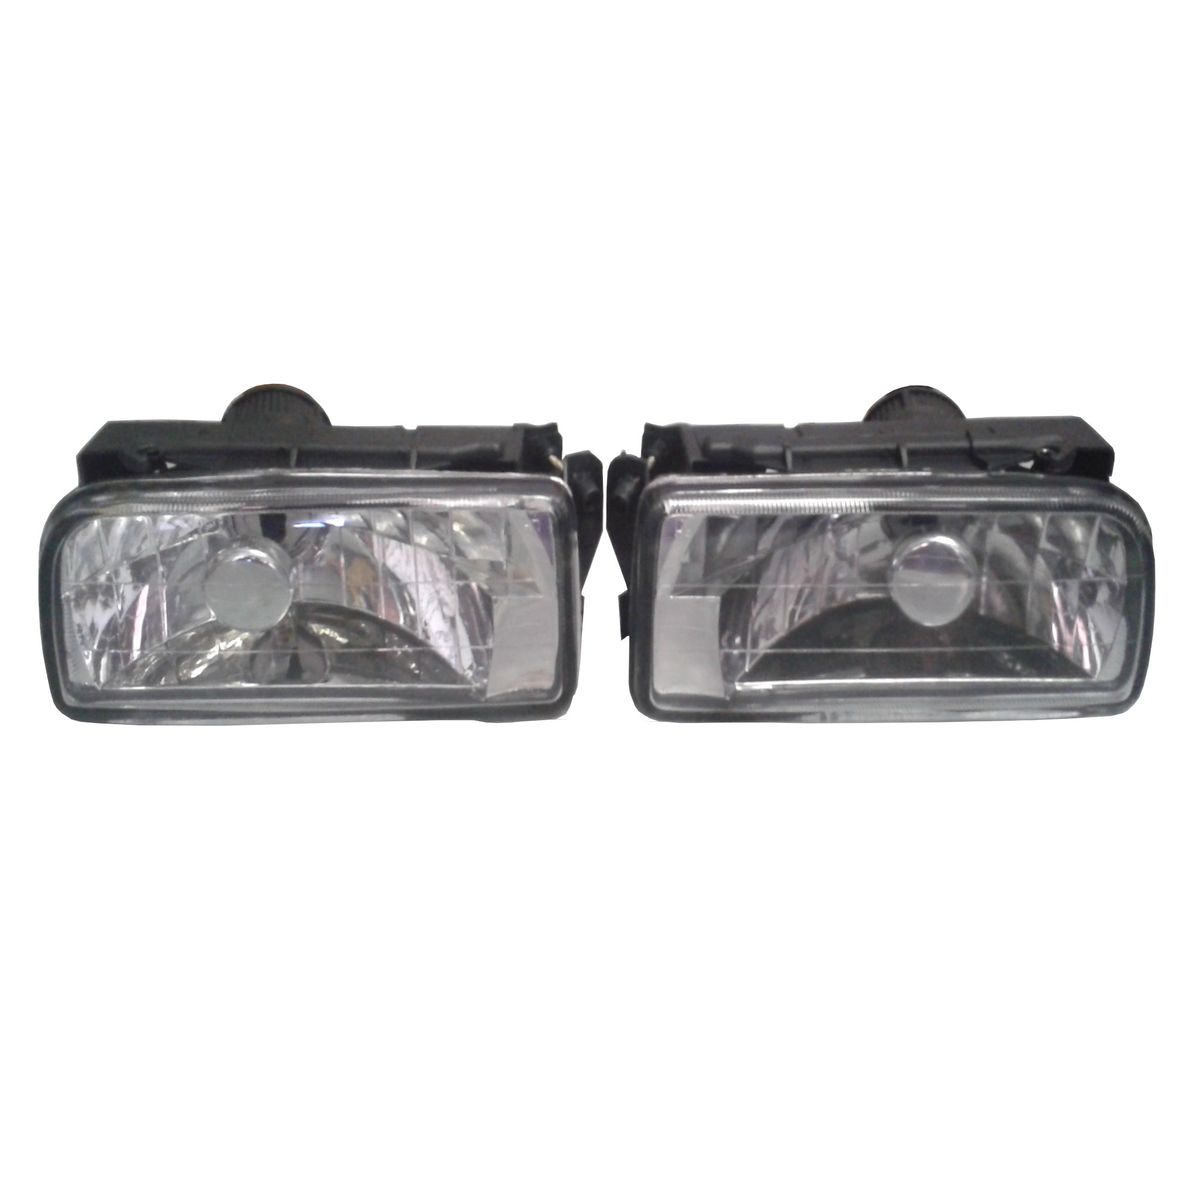 BMW E36 (Dolphin) Clear Spotlights / Fog Lamps | Shop Today. Get